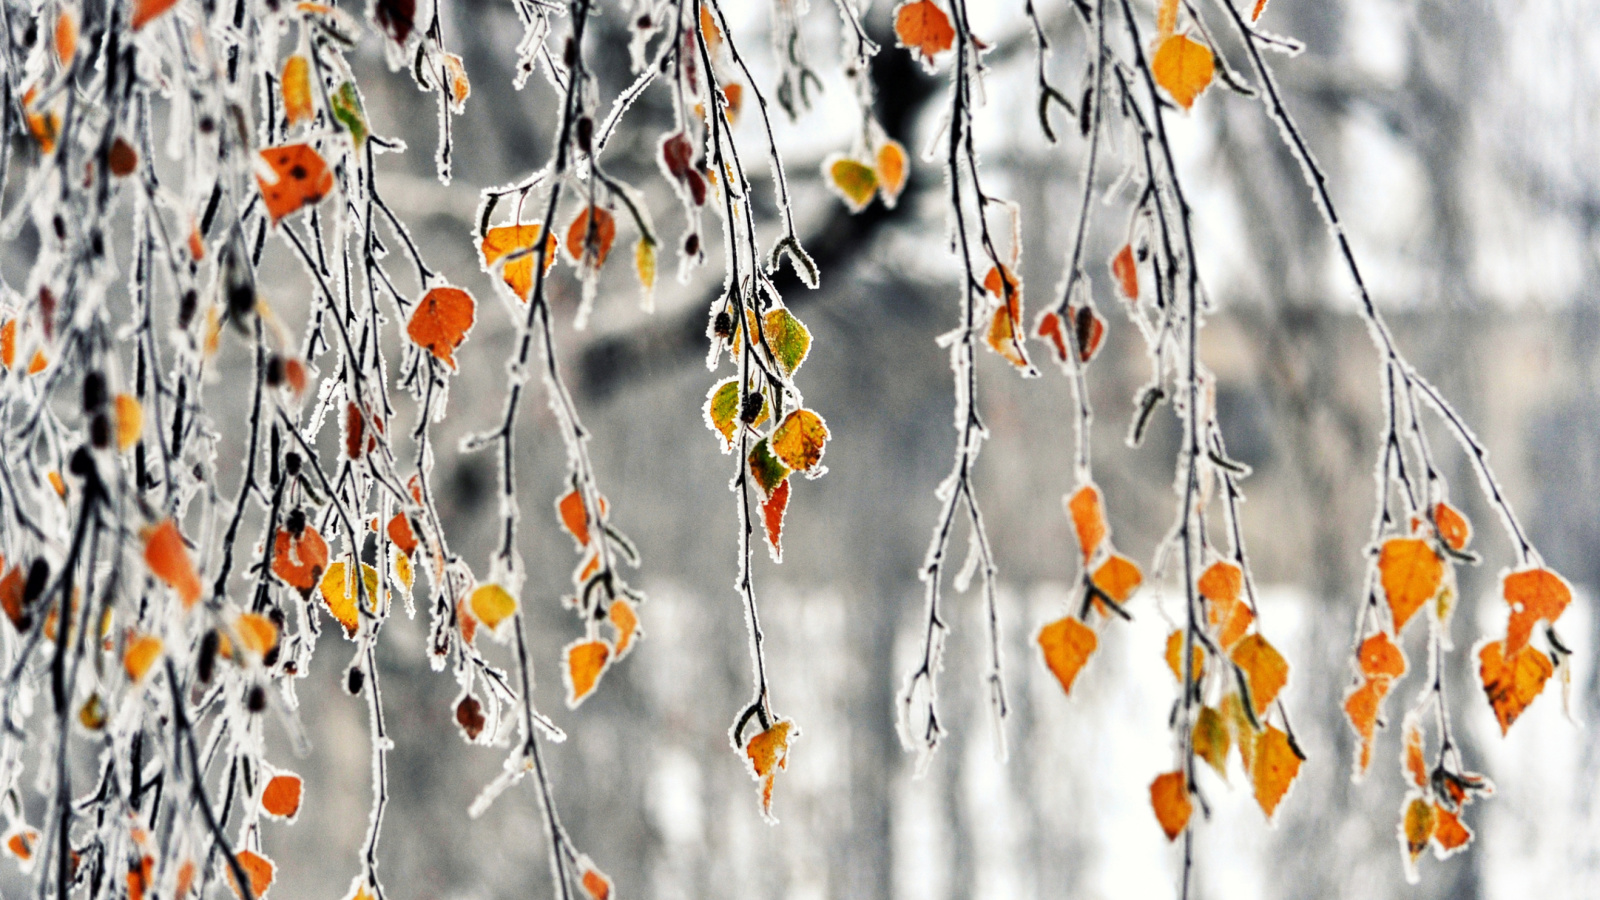 Autumn leaves in frost wallpaper 1600x900